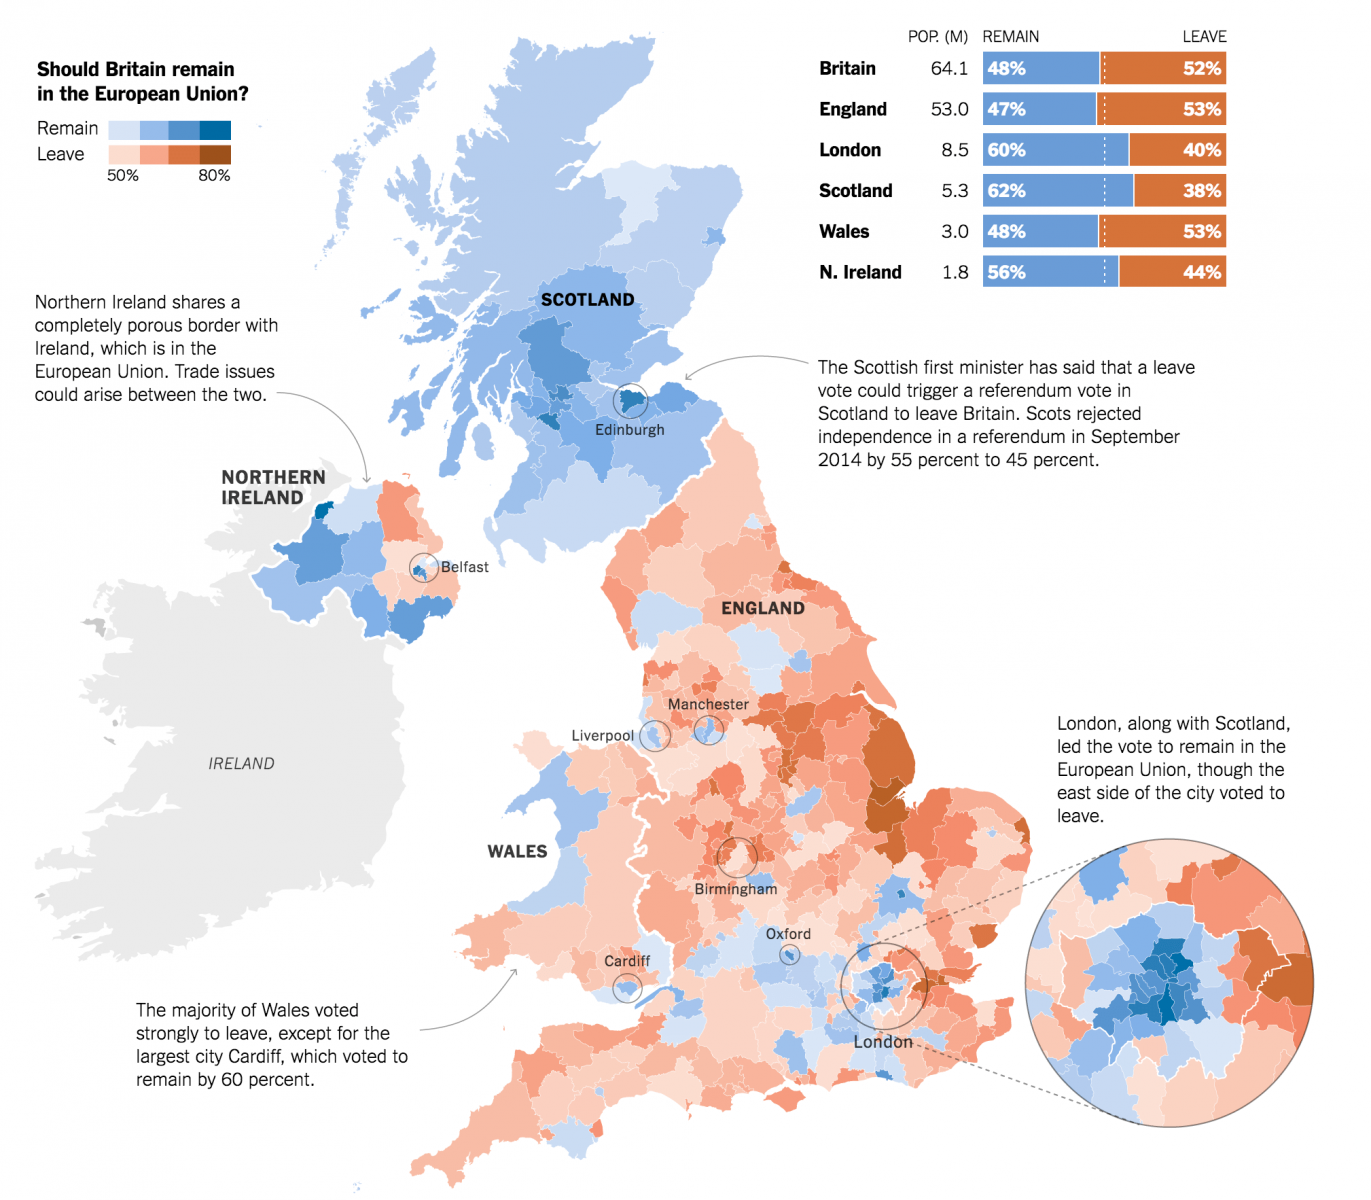 Source: New York Times, [How Britain Voted in the E.U. Referendum](http://www.nytimes.com/interactive/2016/06/24/world/europe/how-britain-voted-brexit-referendum.html)